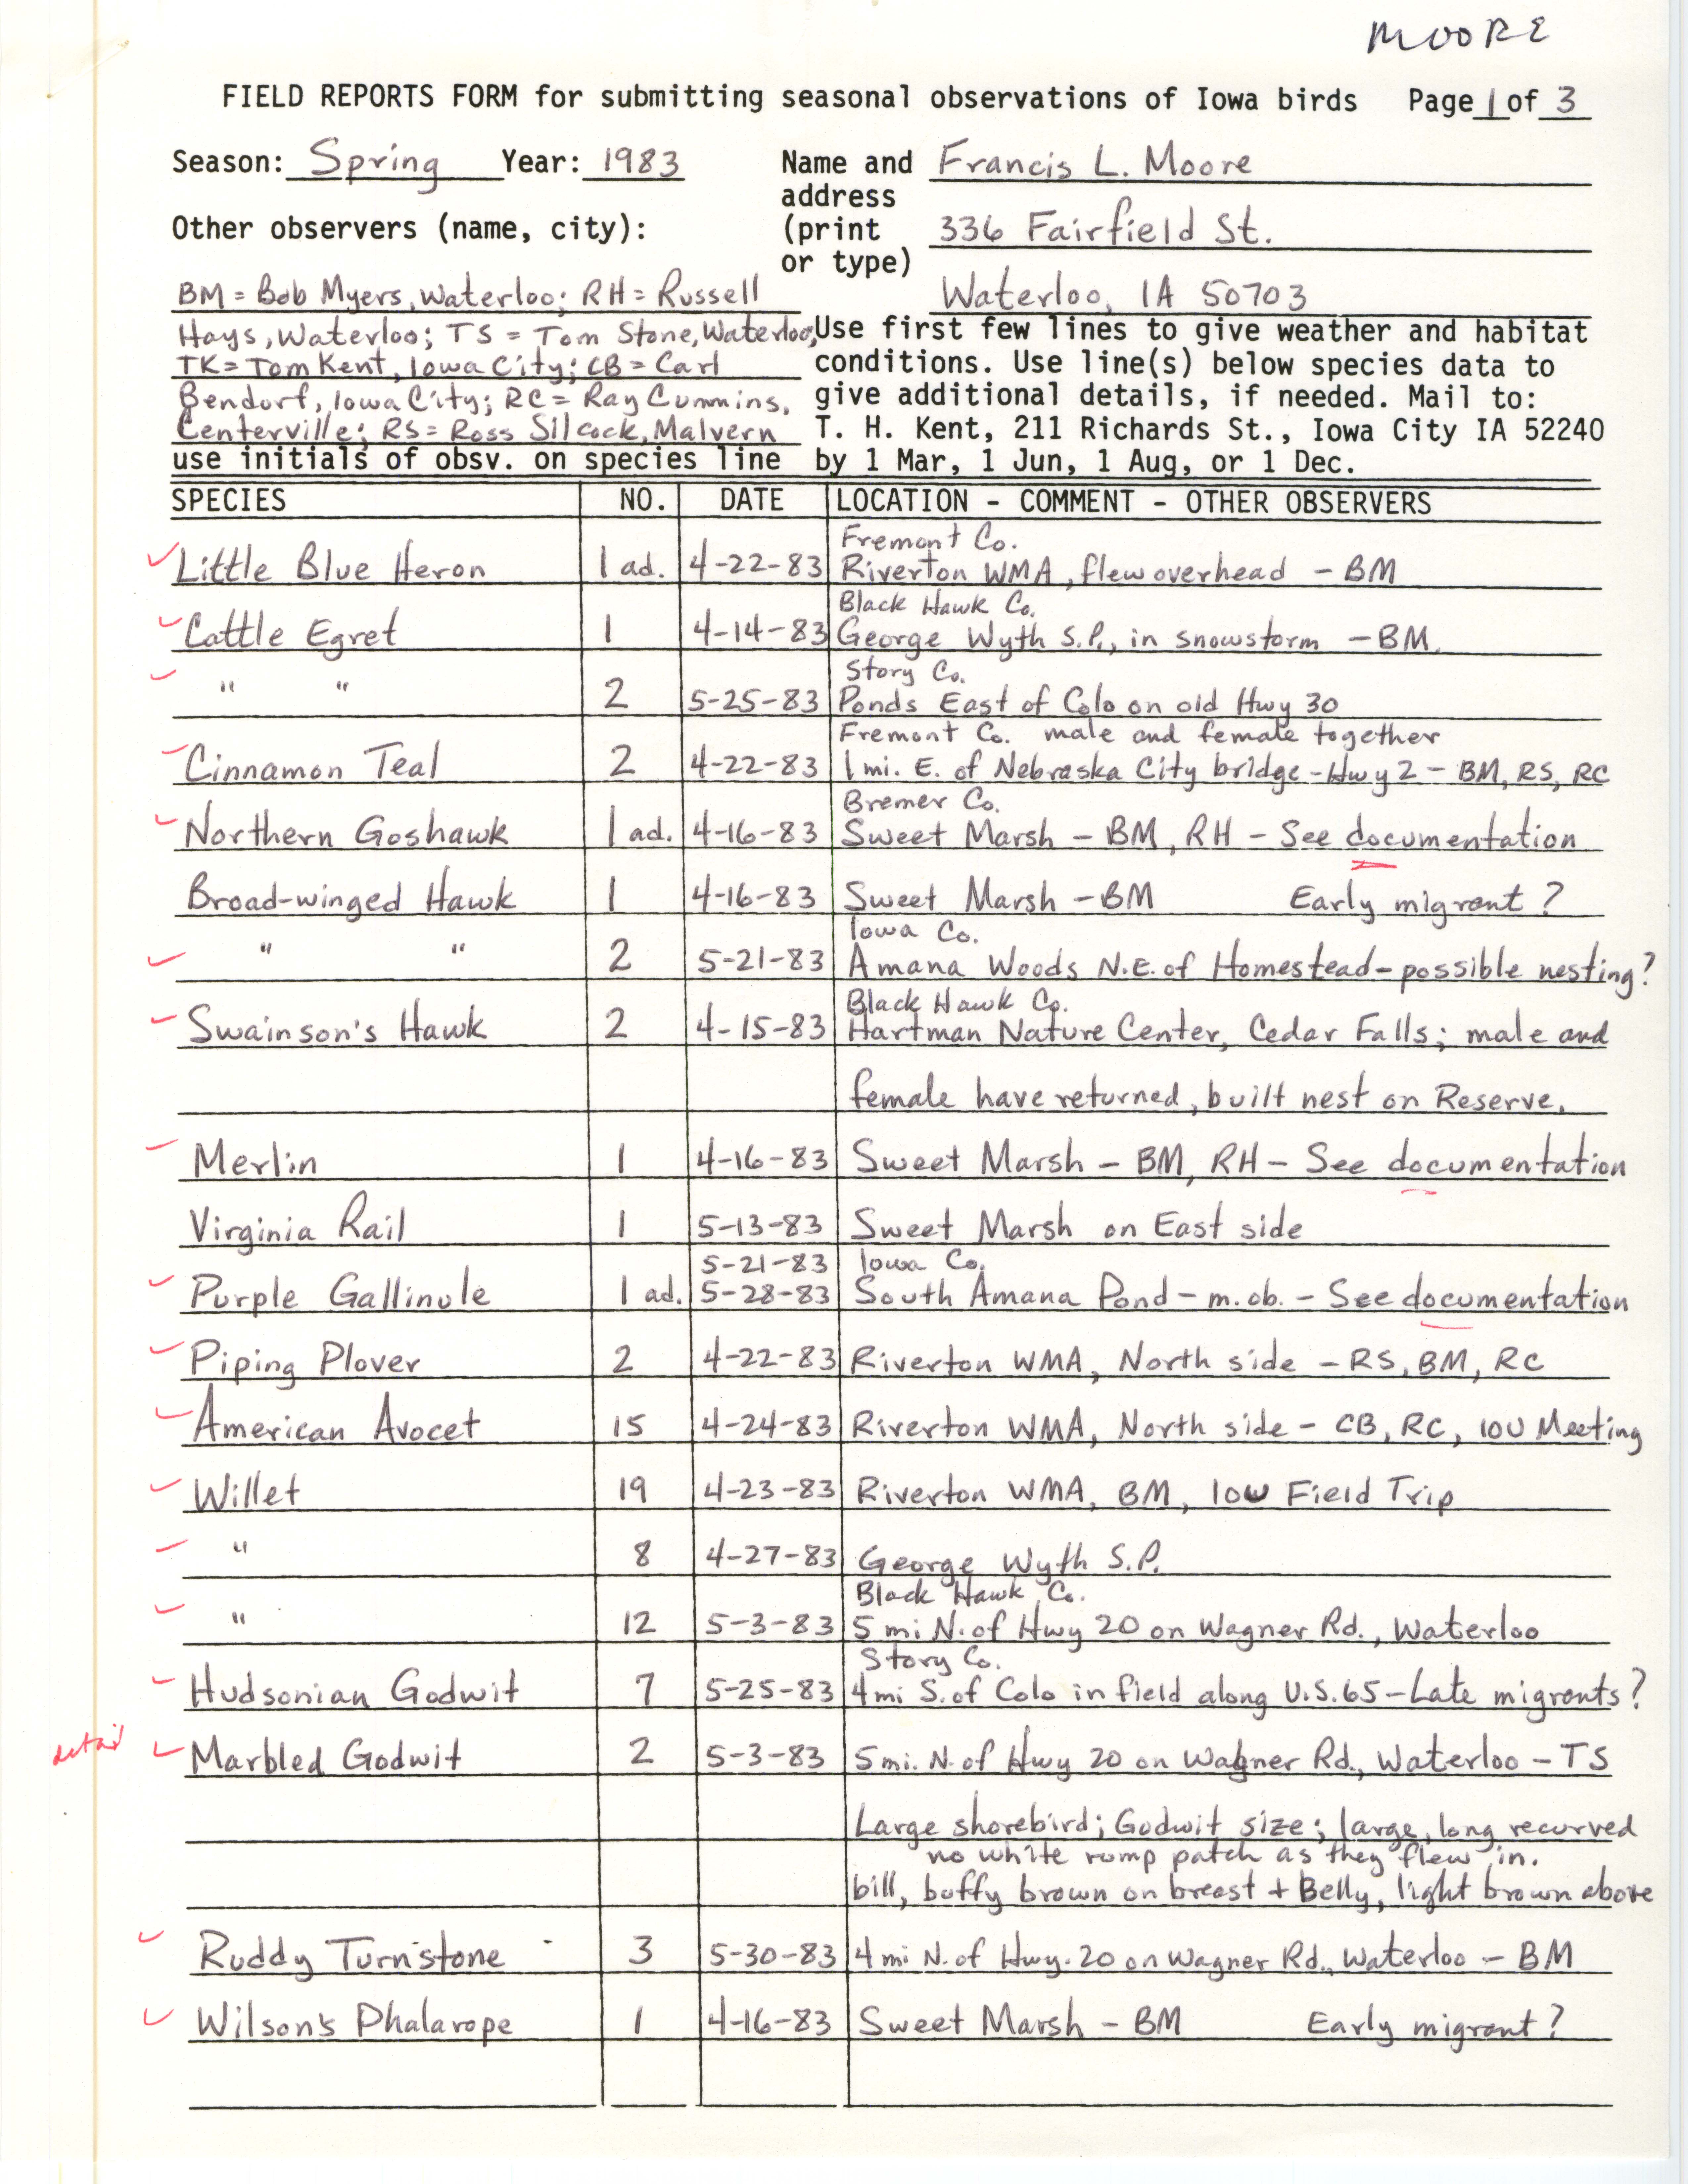 Field reports form for submitting seasonal observations of Iowa birds, Francis L. Moore, spring 1983